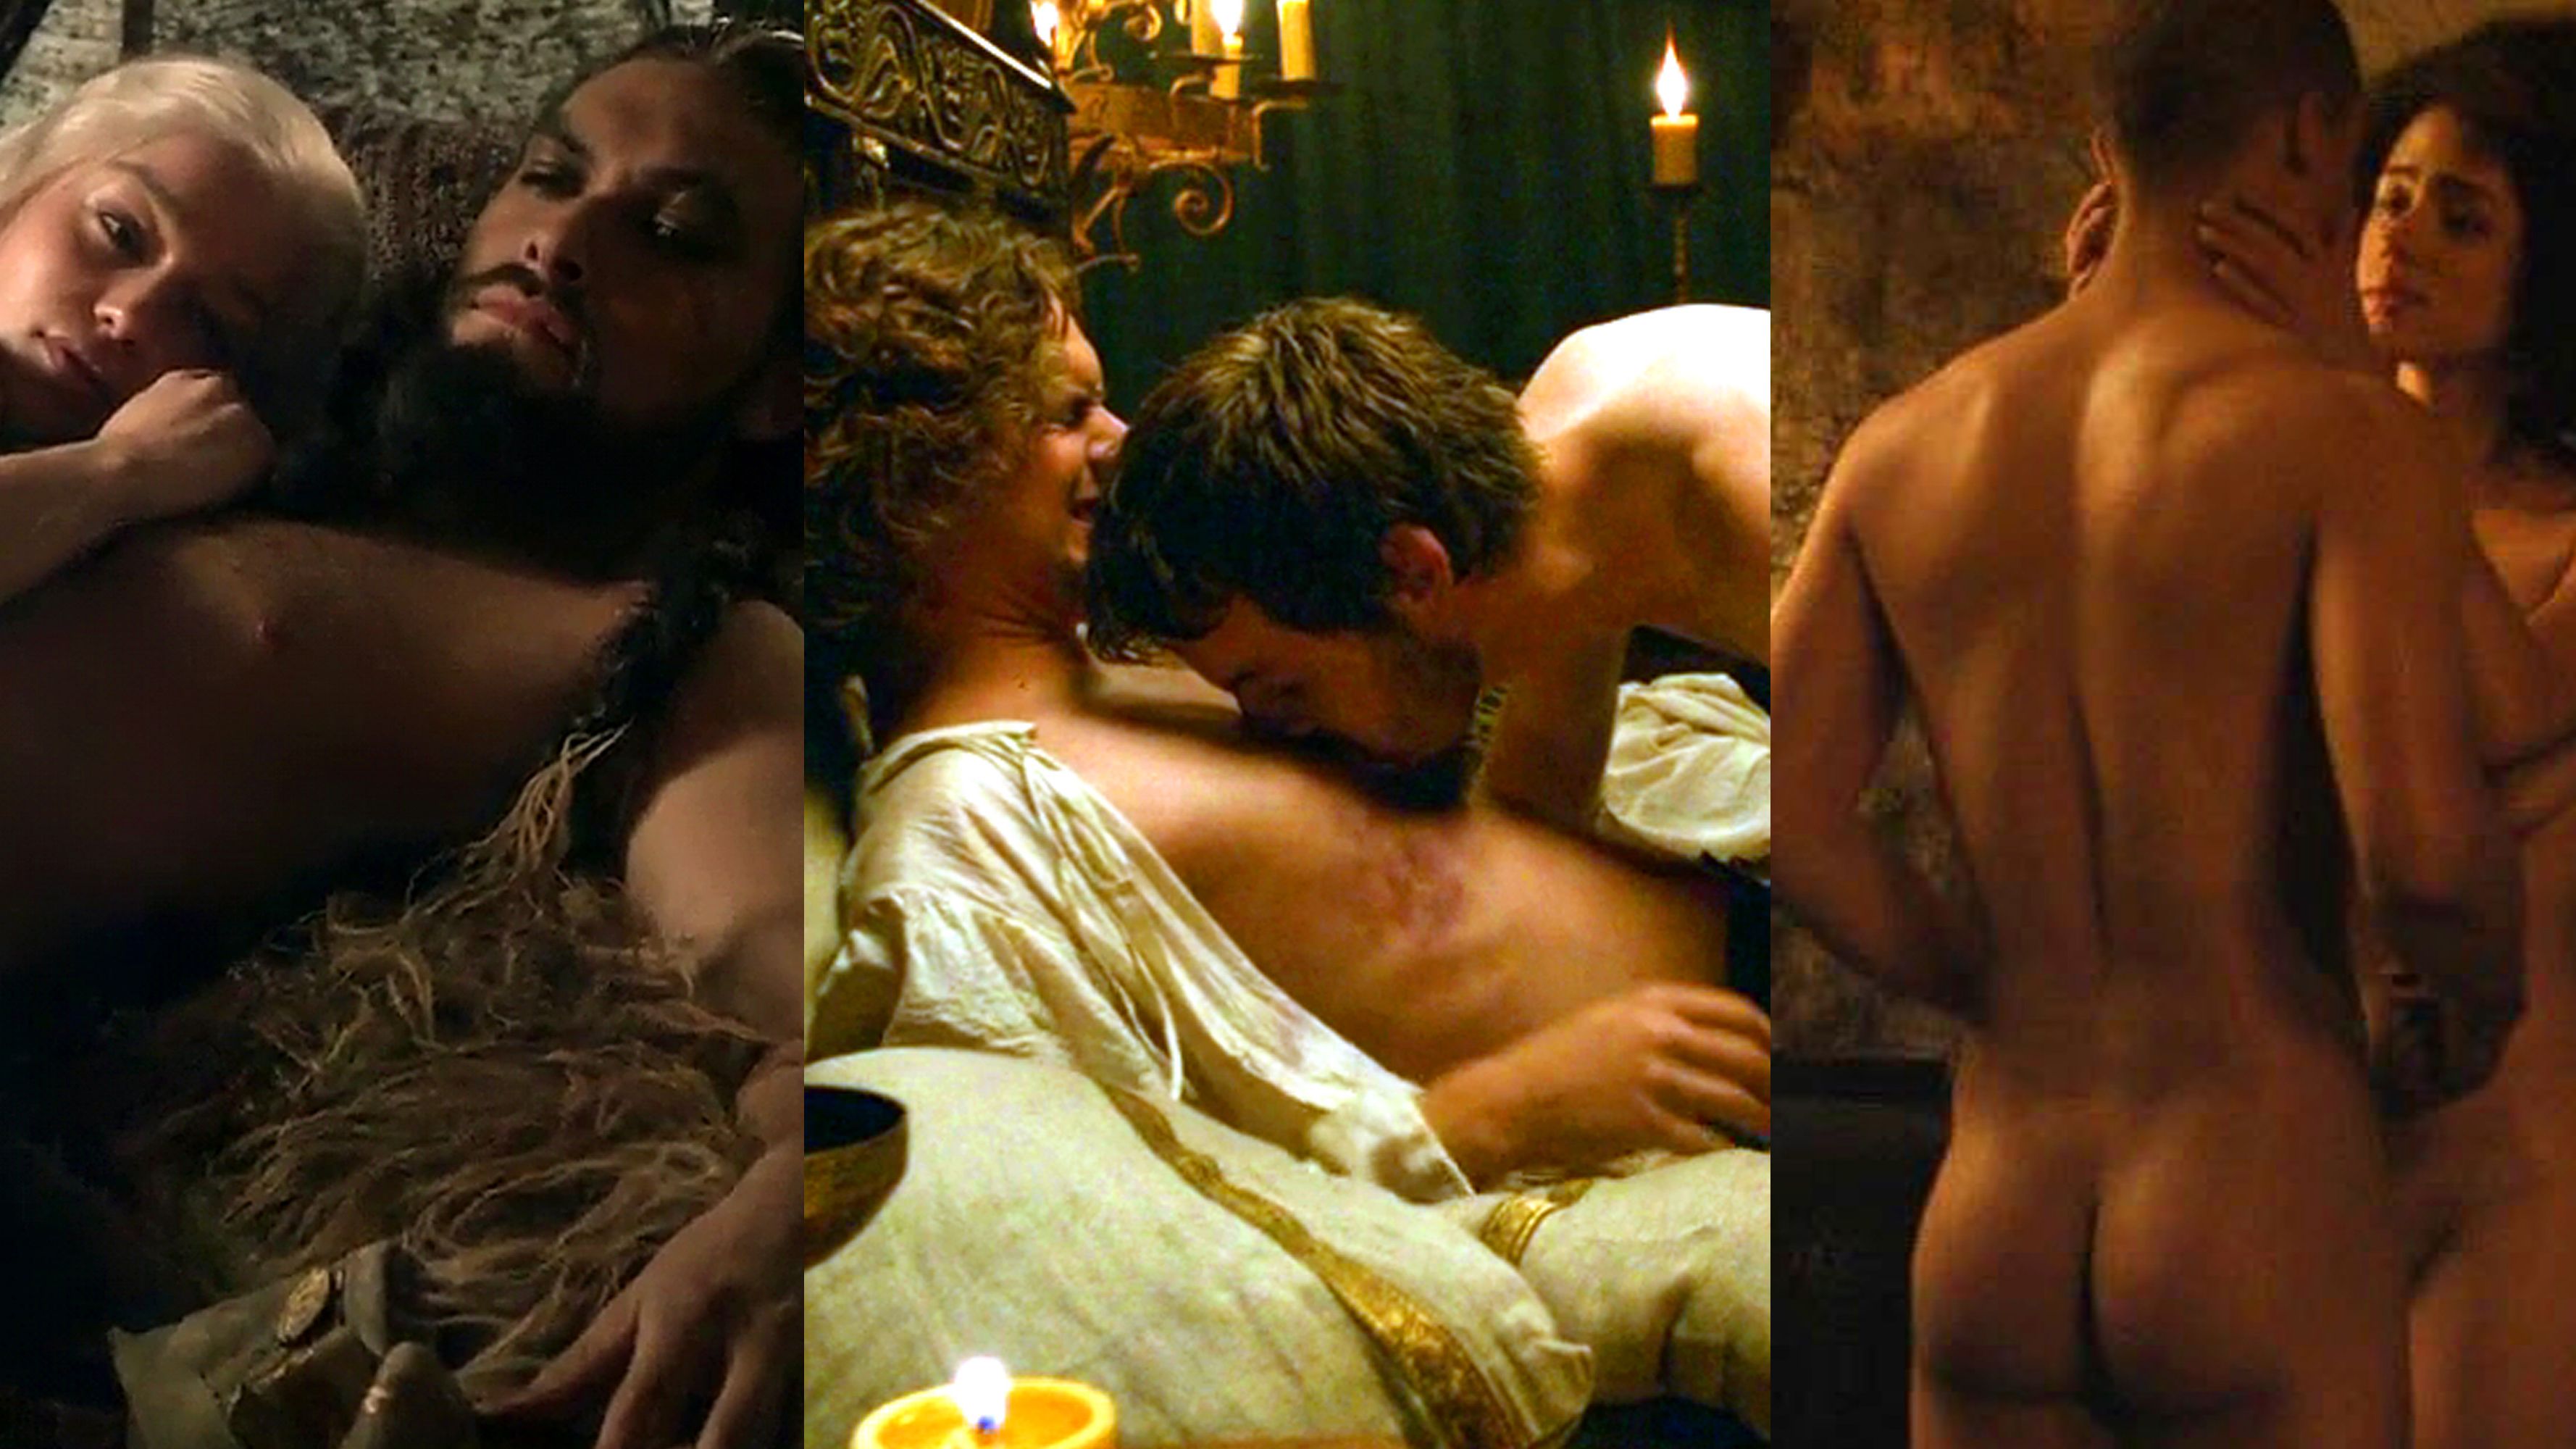 Game of thrones all.sex scenes